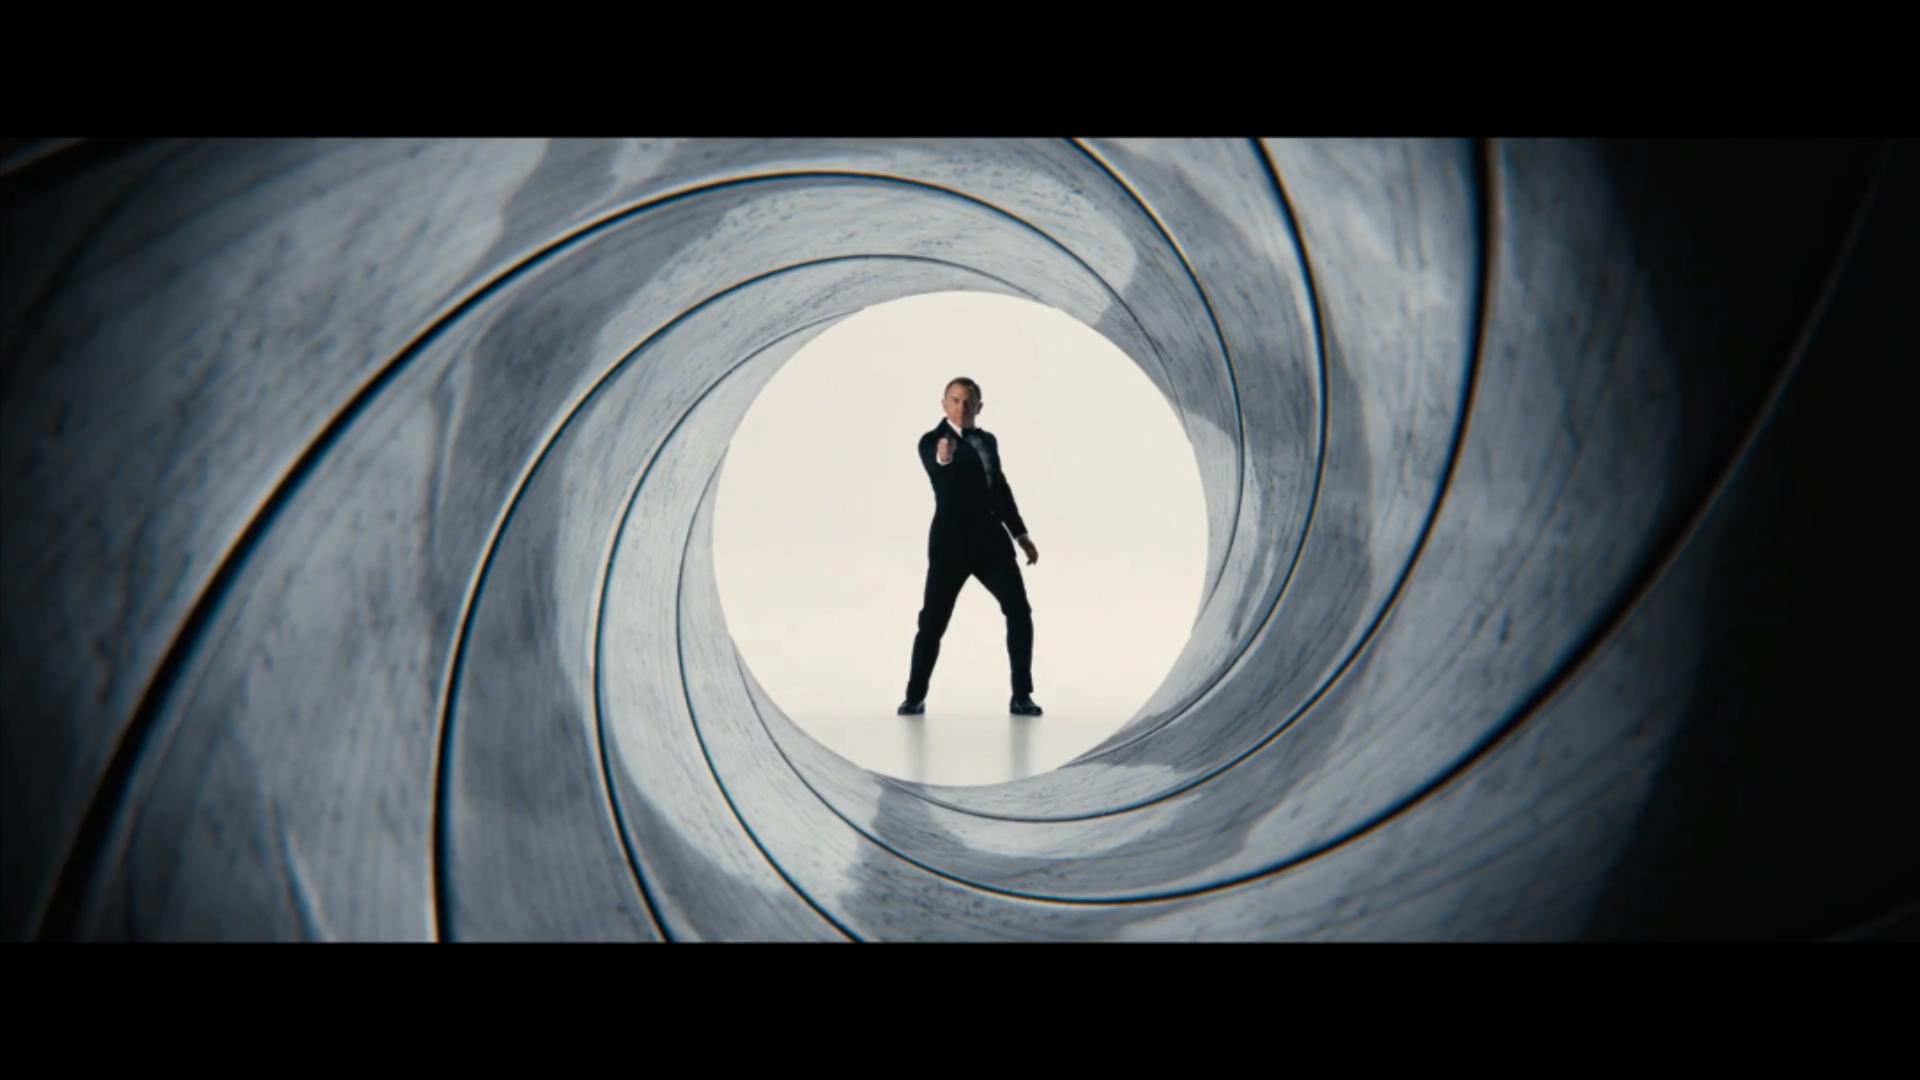 Daniel Craig in the opening shot of the barrel swirl in 'No Time to Die'